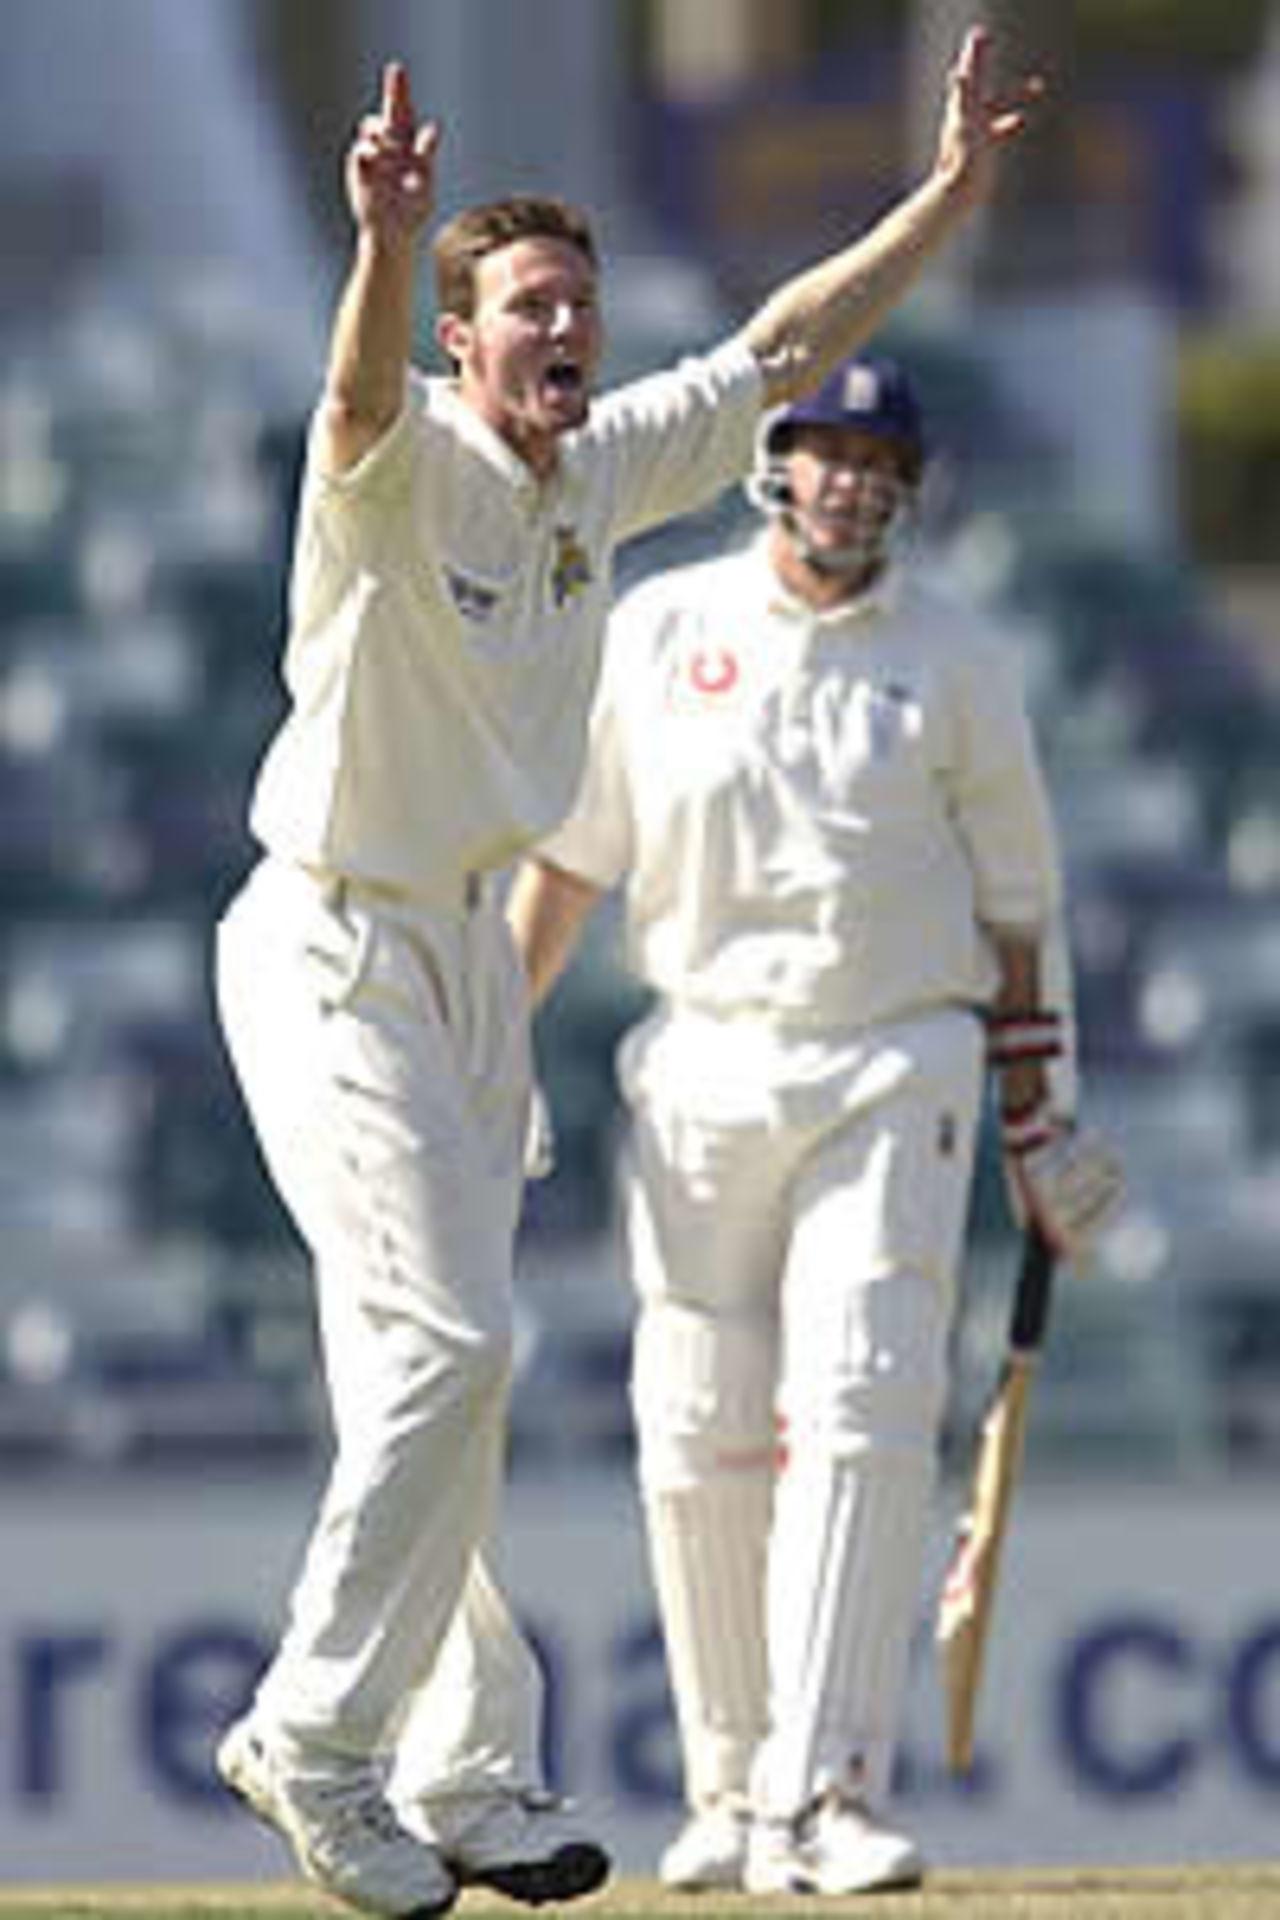 PERTH - OCTOBER 24: Callum Thorp of Western Australia appeals for and gets the wicket of Ashley Giles of England during the two day game between Western Australia and England at the WACA, Perth on October 24 2002.